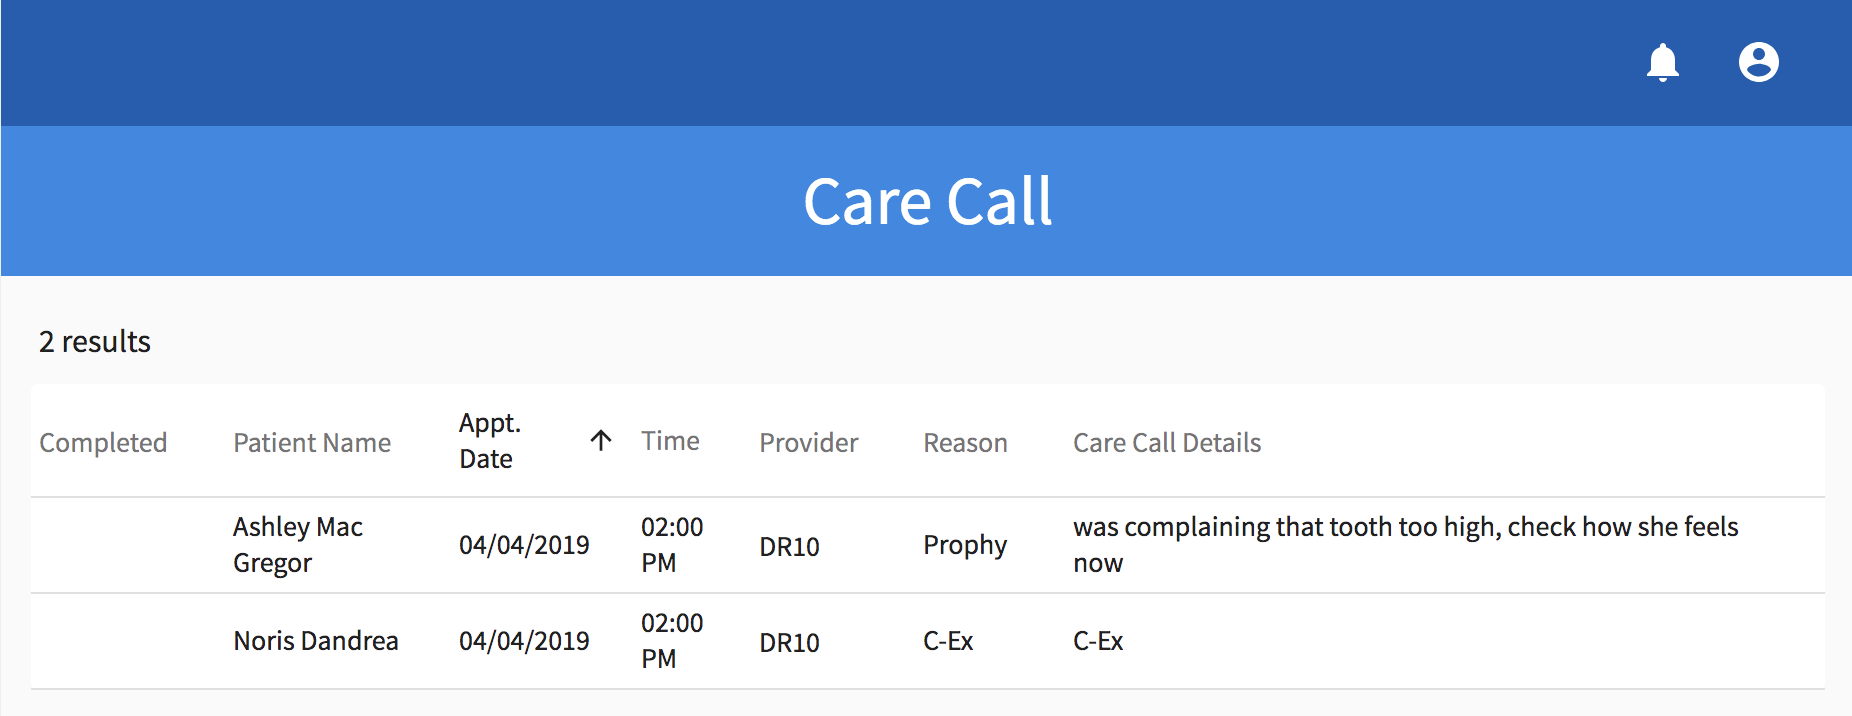 Care_Call_-_First_Screen_Viewing.png